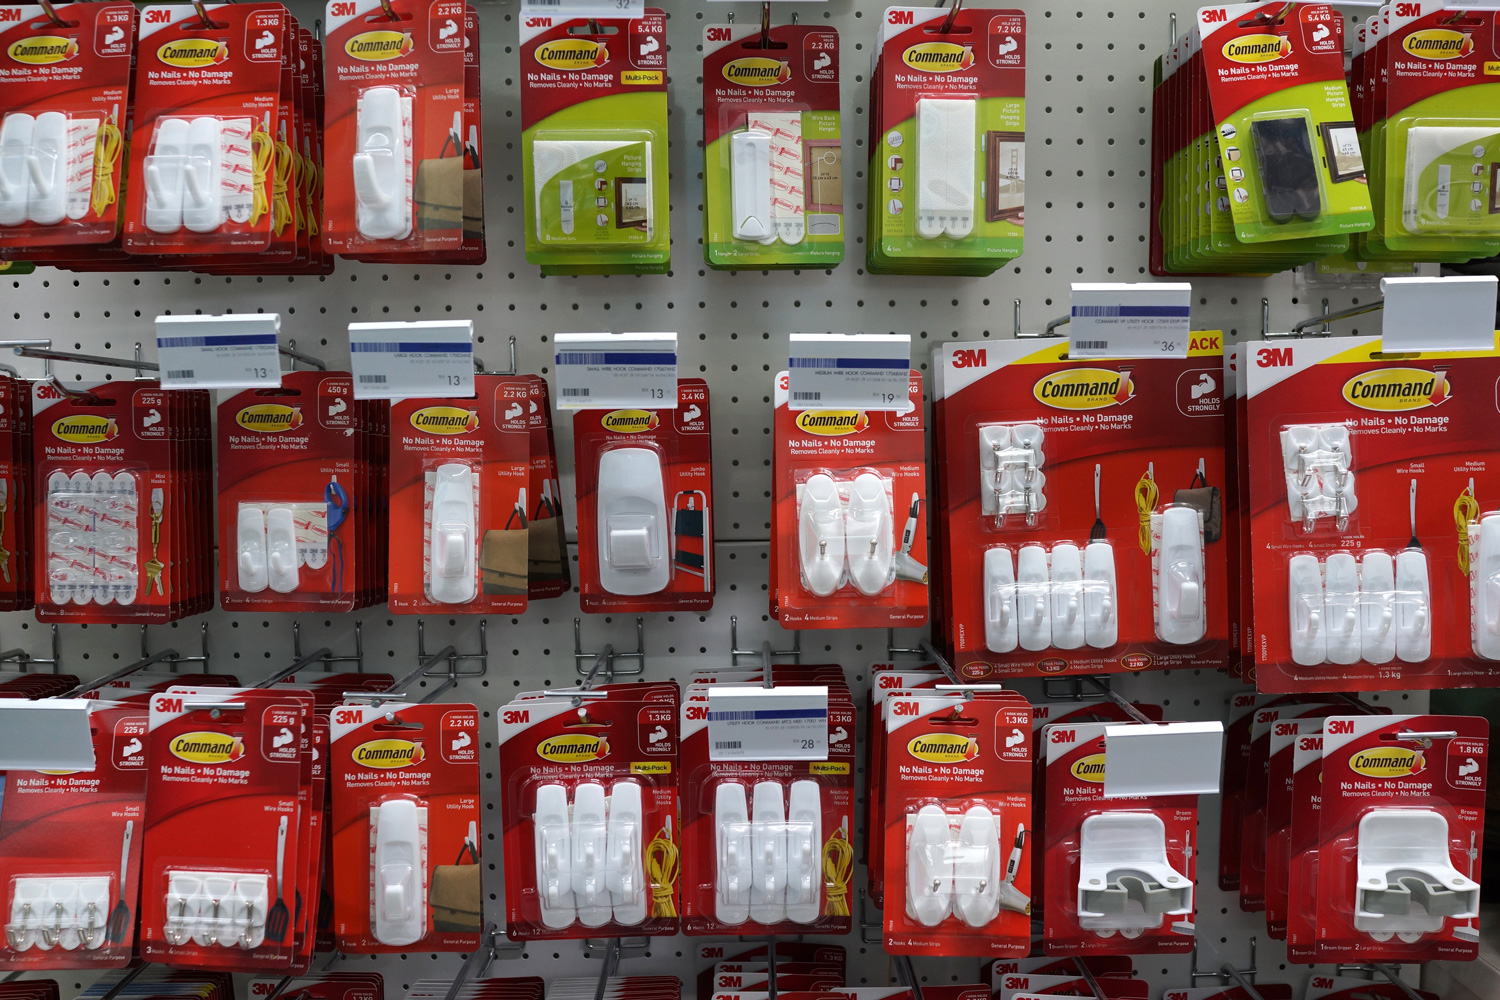 Row of Command brand Picture Hanging Strips and Hooks by 3M company on store shelf. 3M is the general public primarily known for the Post-it Notes and Scotch Tapes.